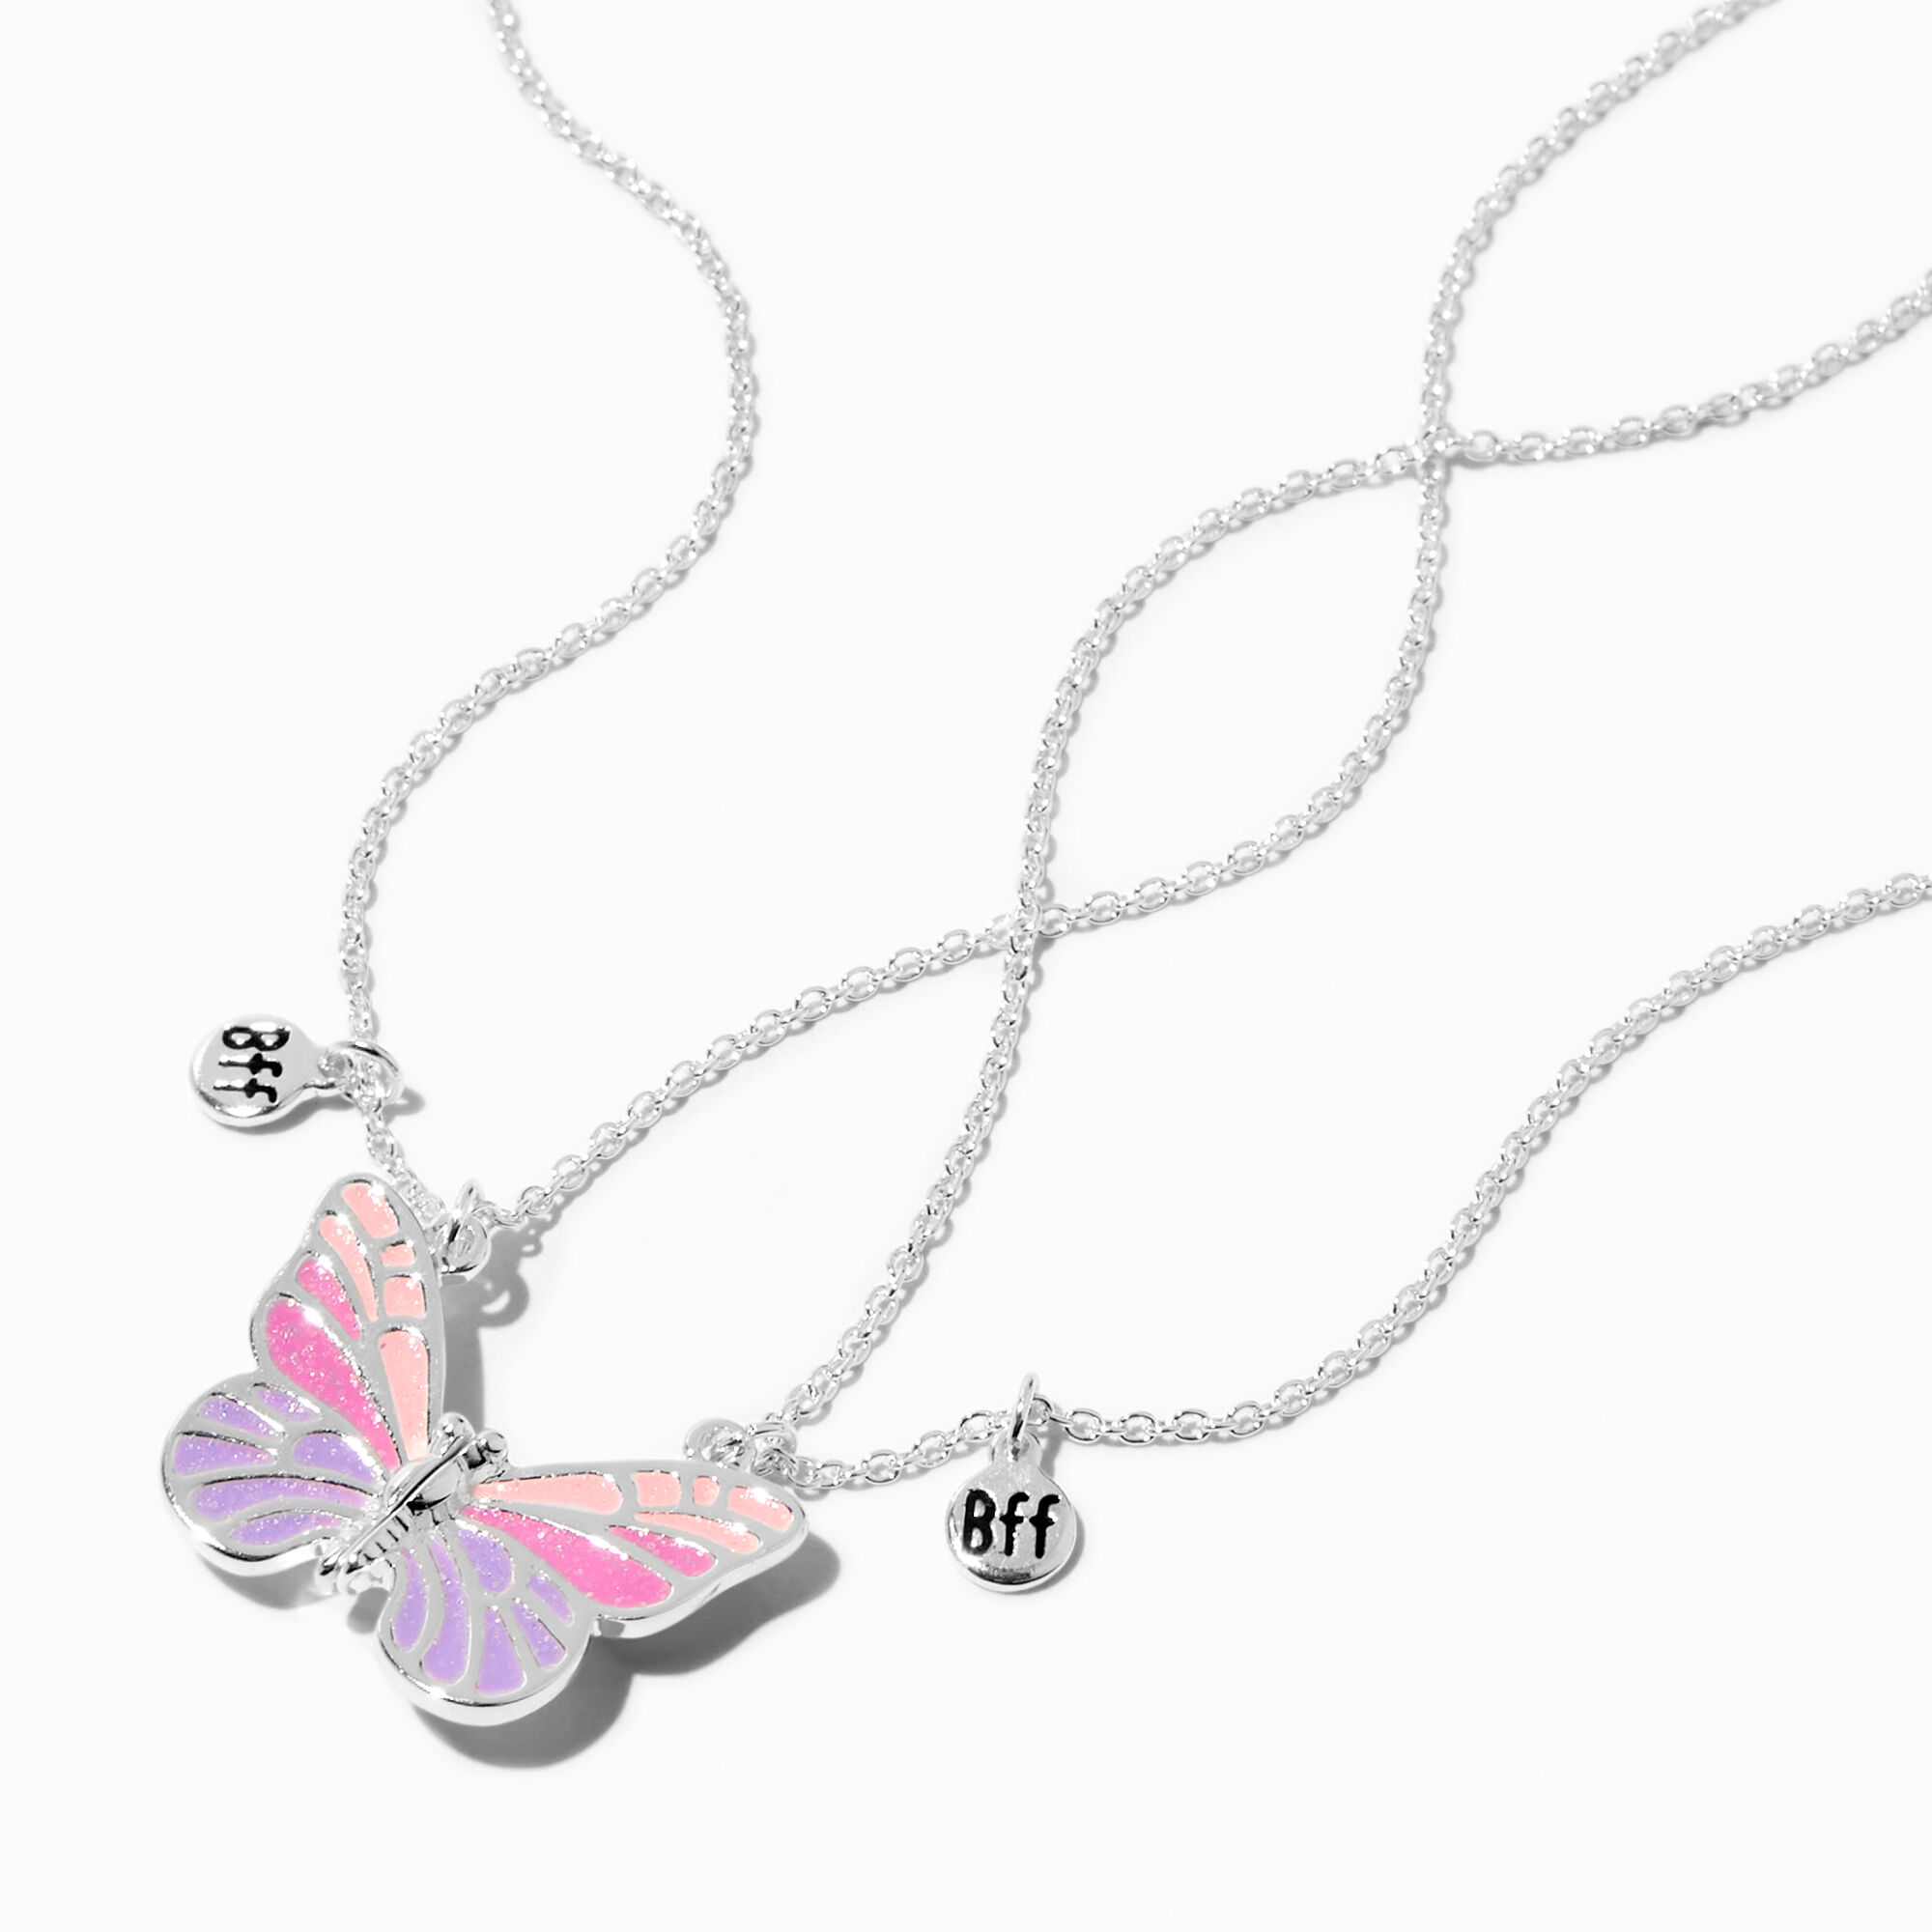 View Claires Best Friends Uv ColourChanging Split Butterfly Pendant Necklaces 2 Pack Silver information